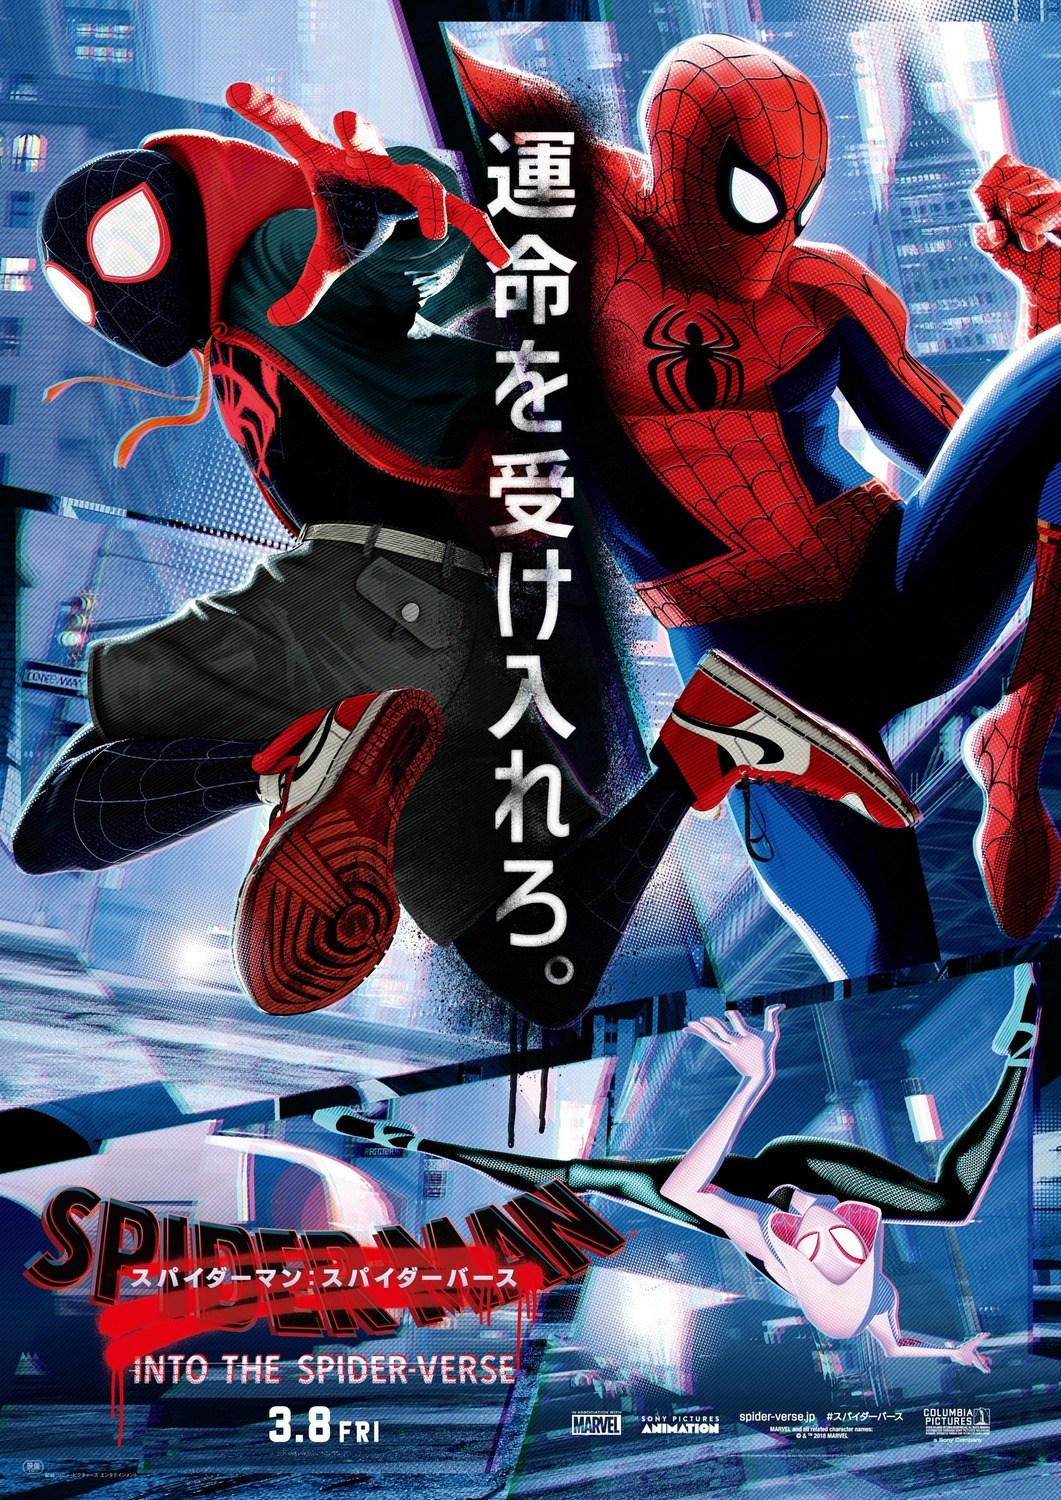 Check Out The Japanese Imax Poster For Spider Man Into The Spider Verse Hi Def Ninja Blu Ray Steelbooks Pop Culture Movie News